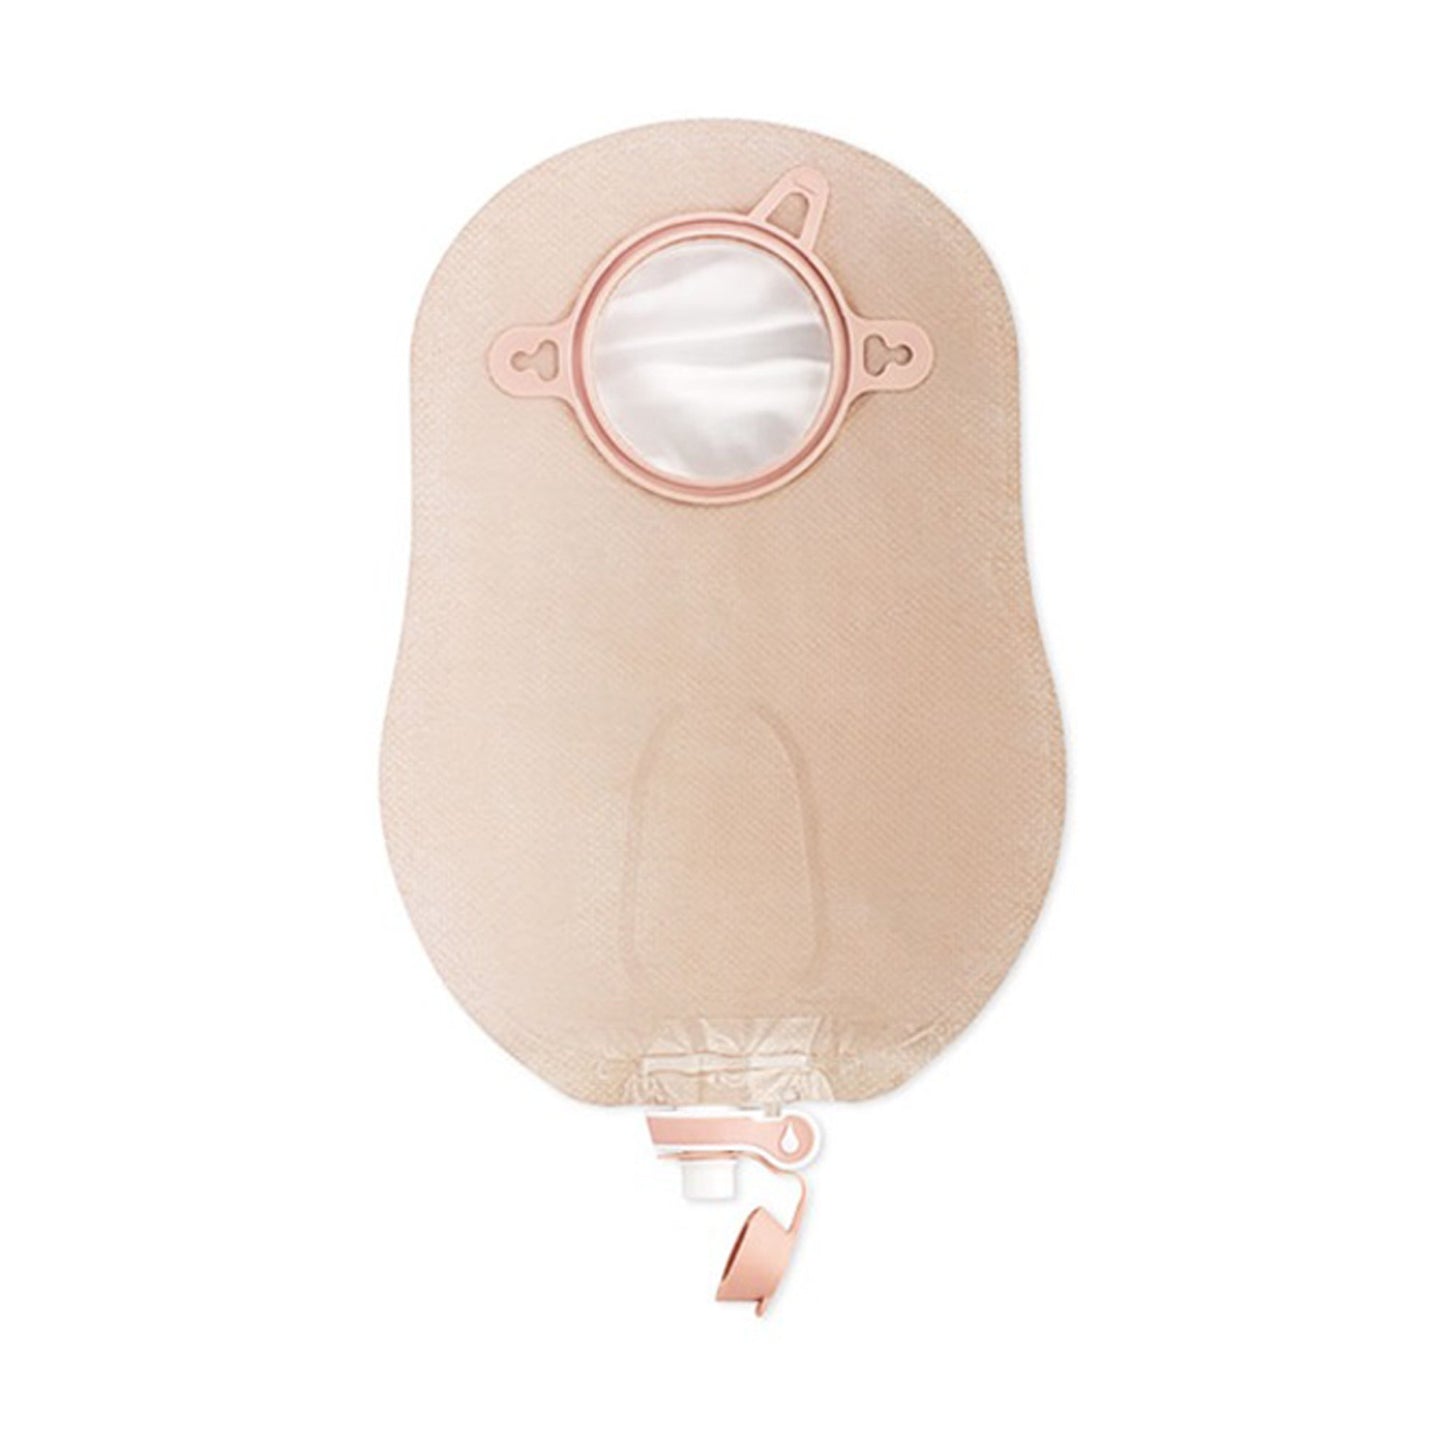 New Image™ Two-Piece Ultra-Clear Urostomy Pouch, 9 Inch Length, 2.25 Inch Flange, 10 ct